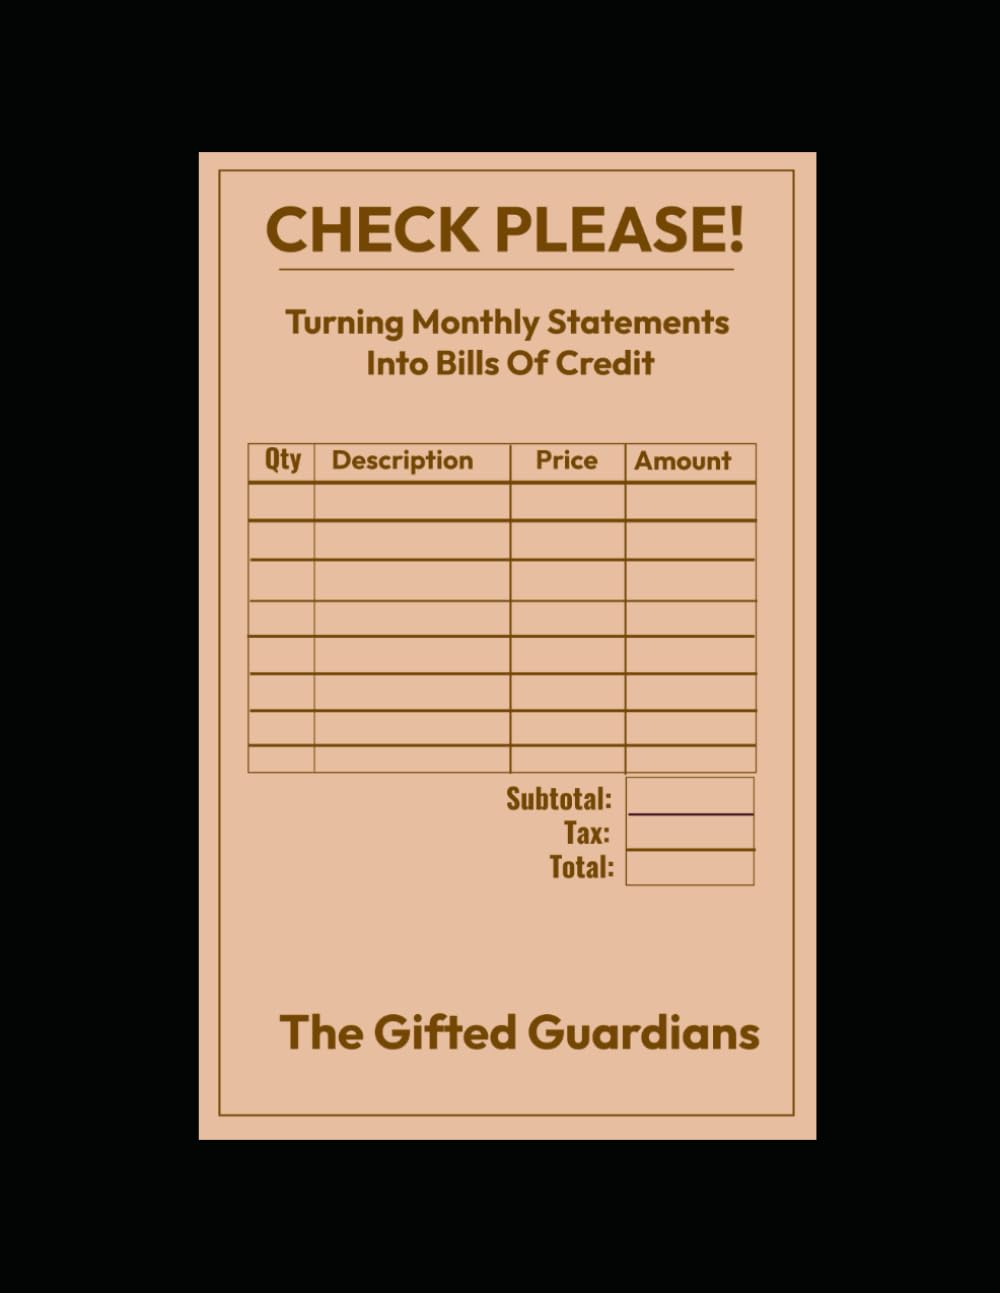 Check Please!: Turning Monthly Statements Into Bills of Credit